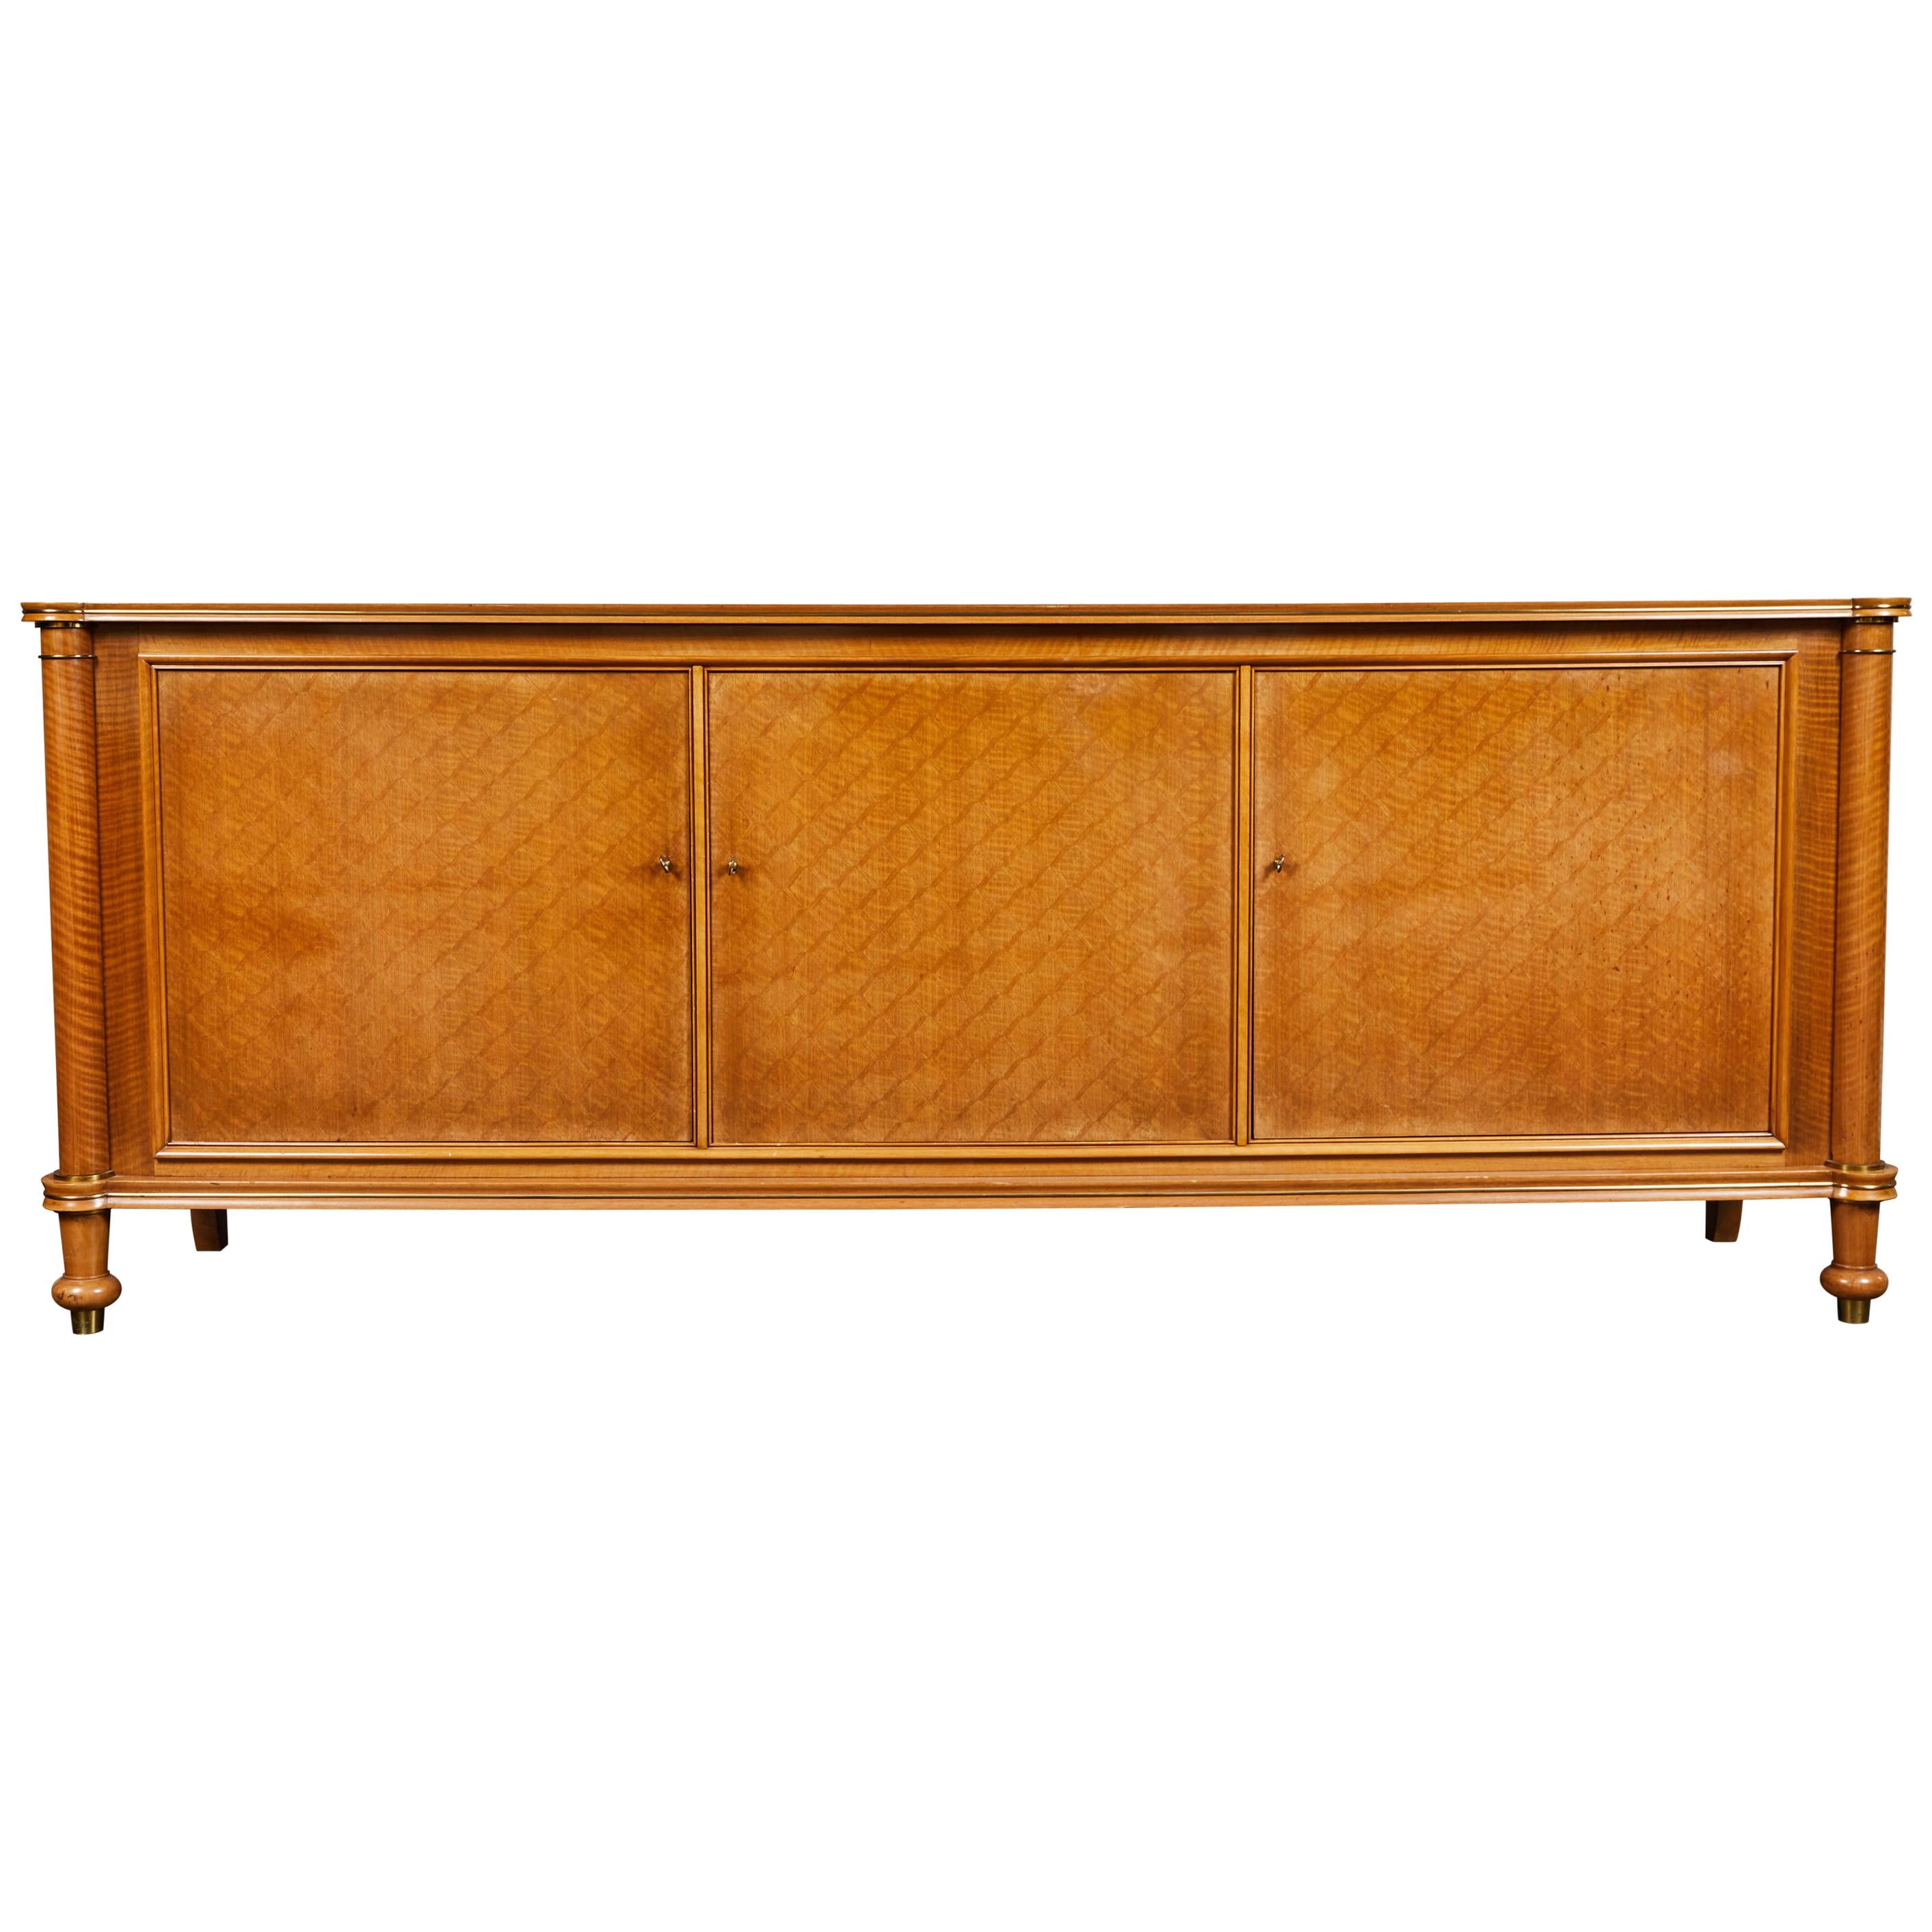 Sideboard Signed and Dated by Jules Leleu